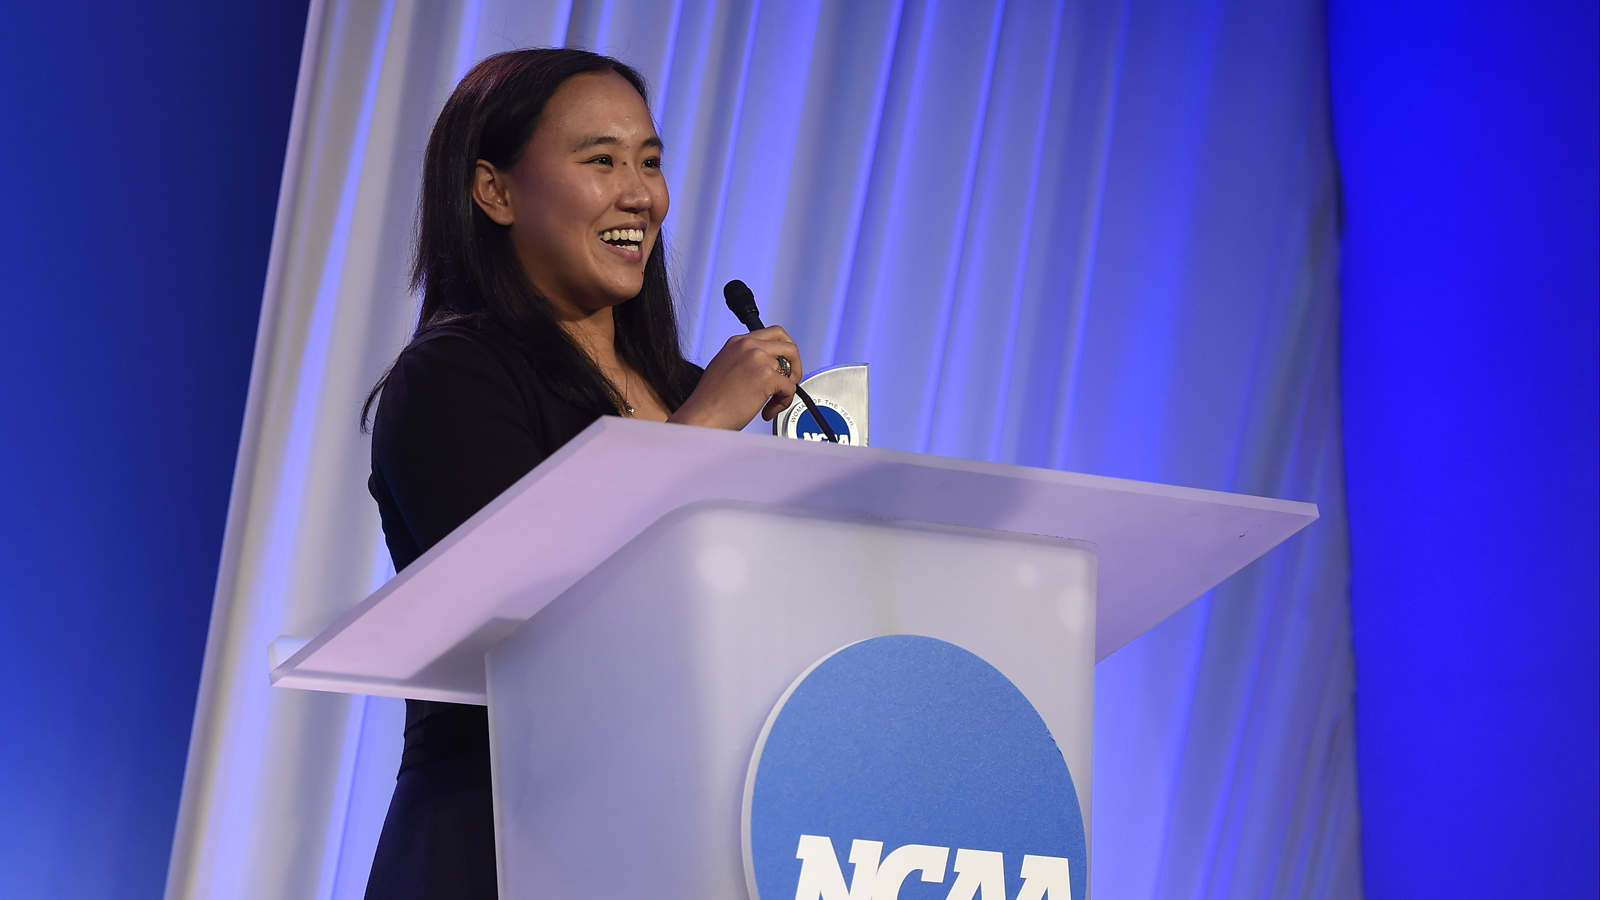 Top 30 Named for 2017 NCAA Woman of the Year Award